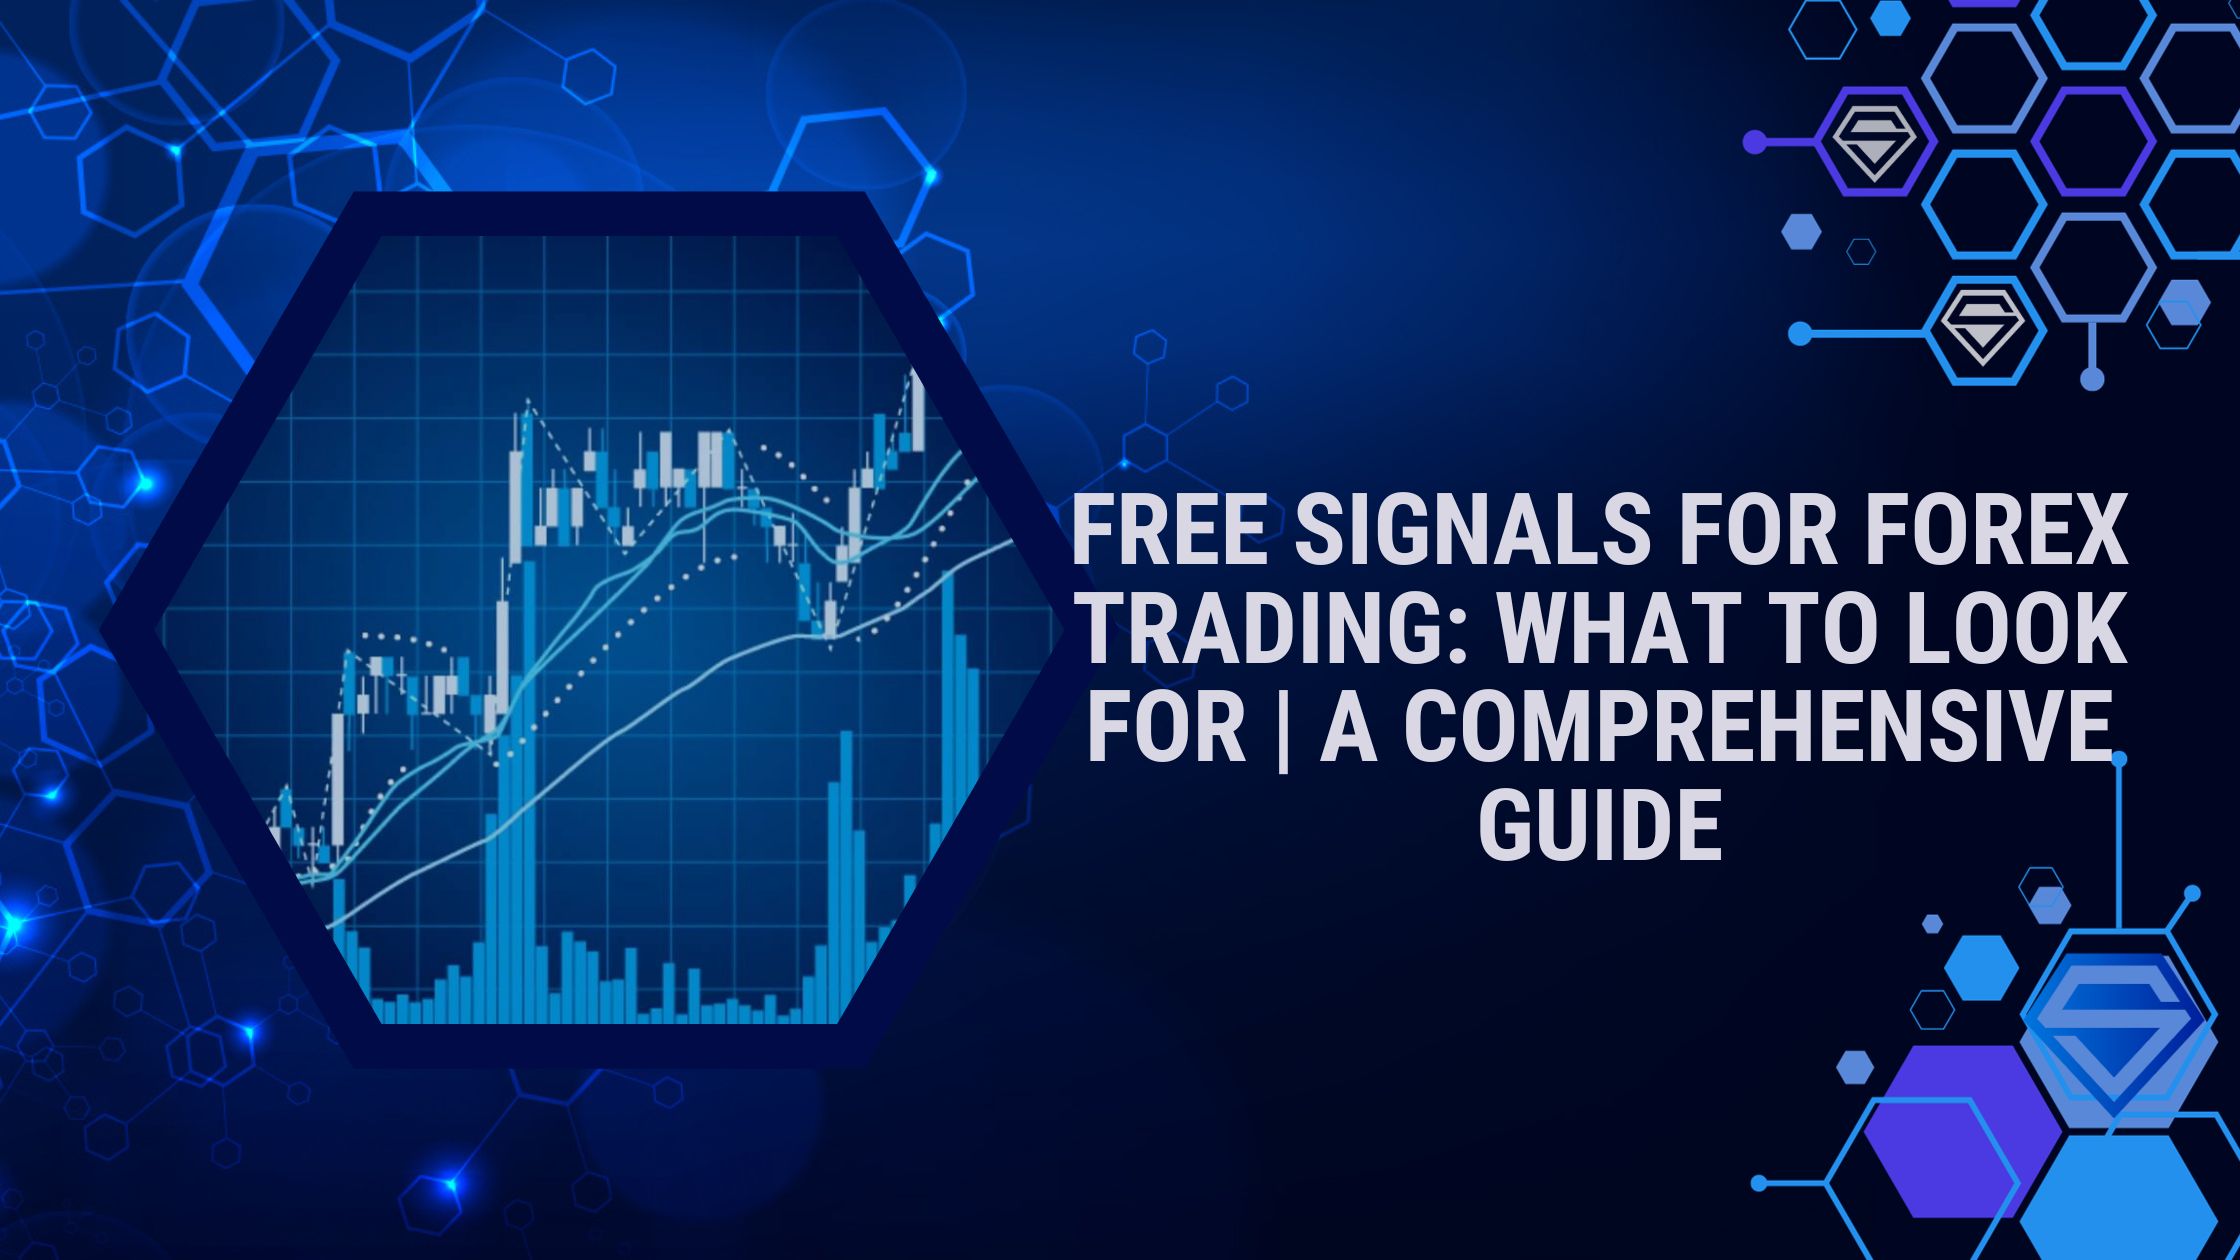 Free Signals for Forex Trading